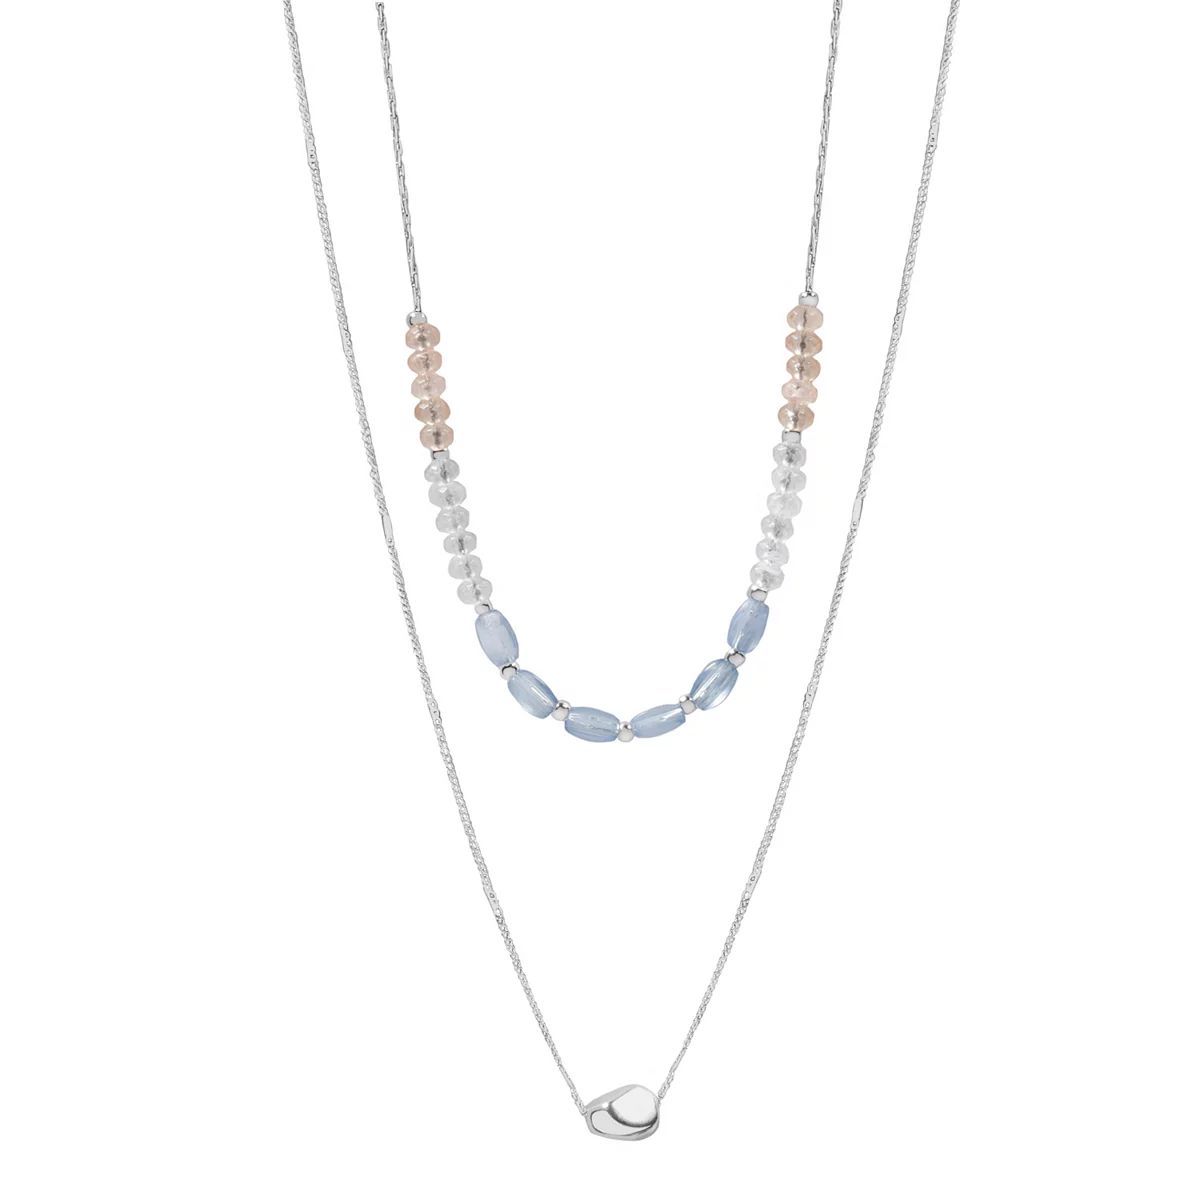 LC Lauren Conrad Silver Tone Layered Beads Necklace | Kohl's